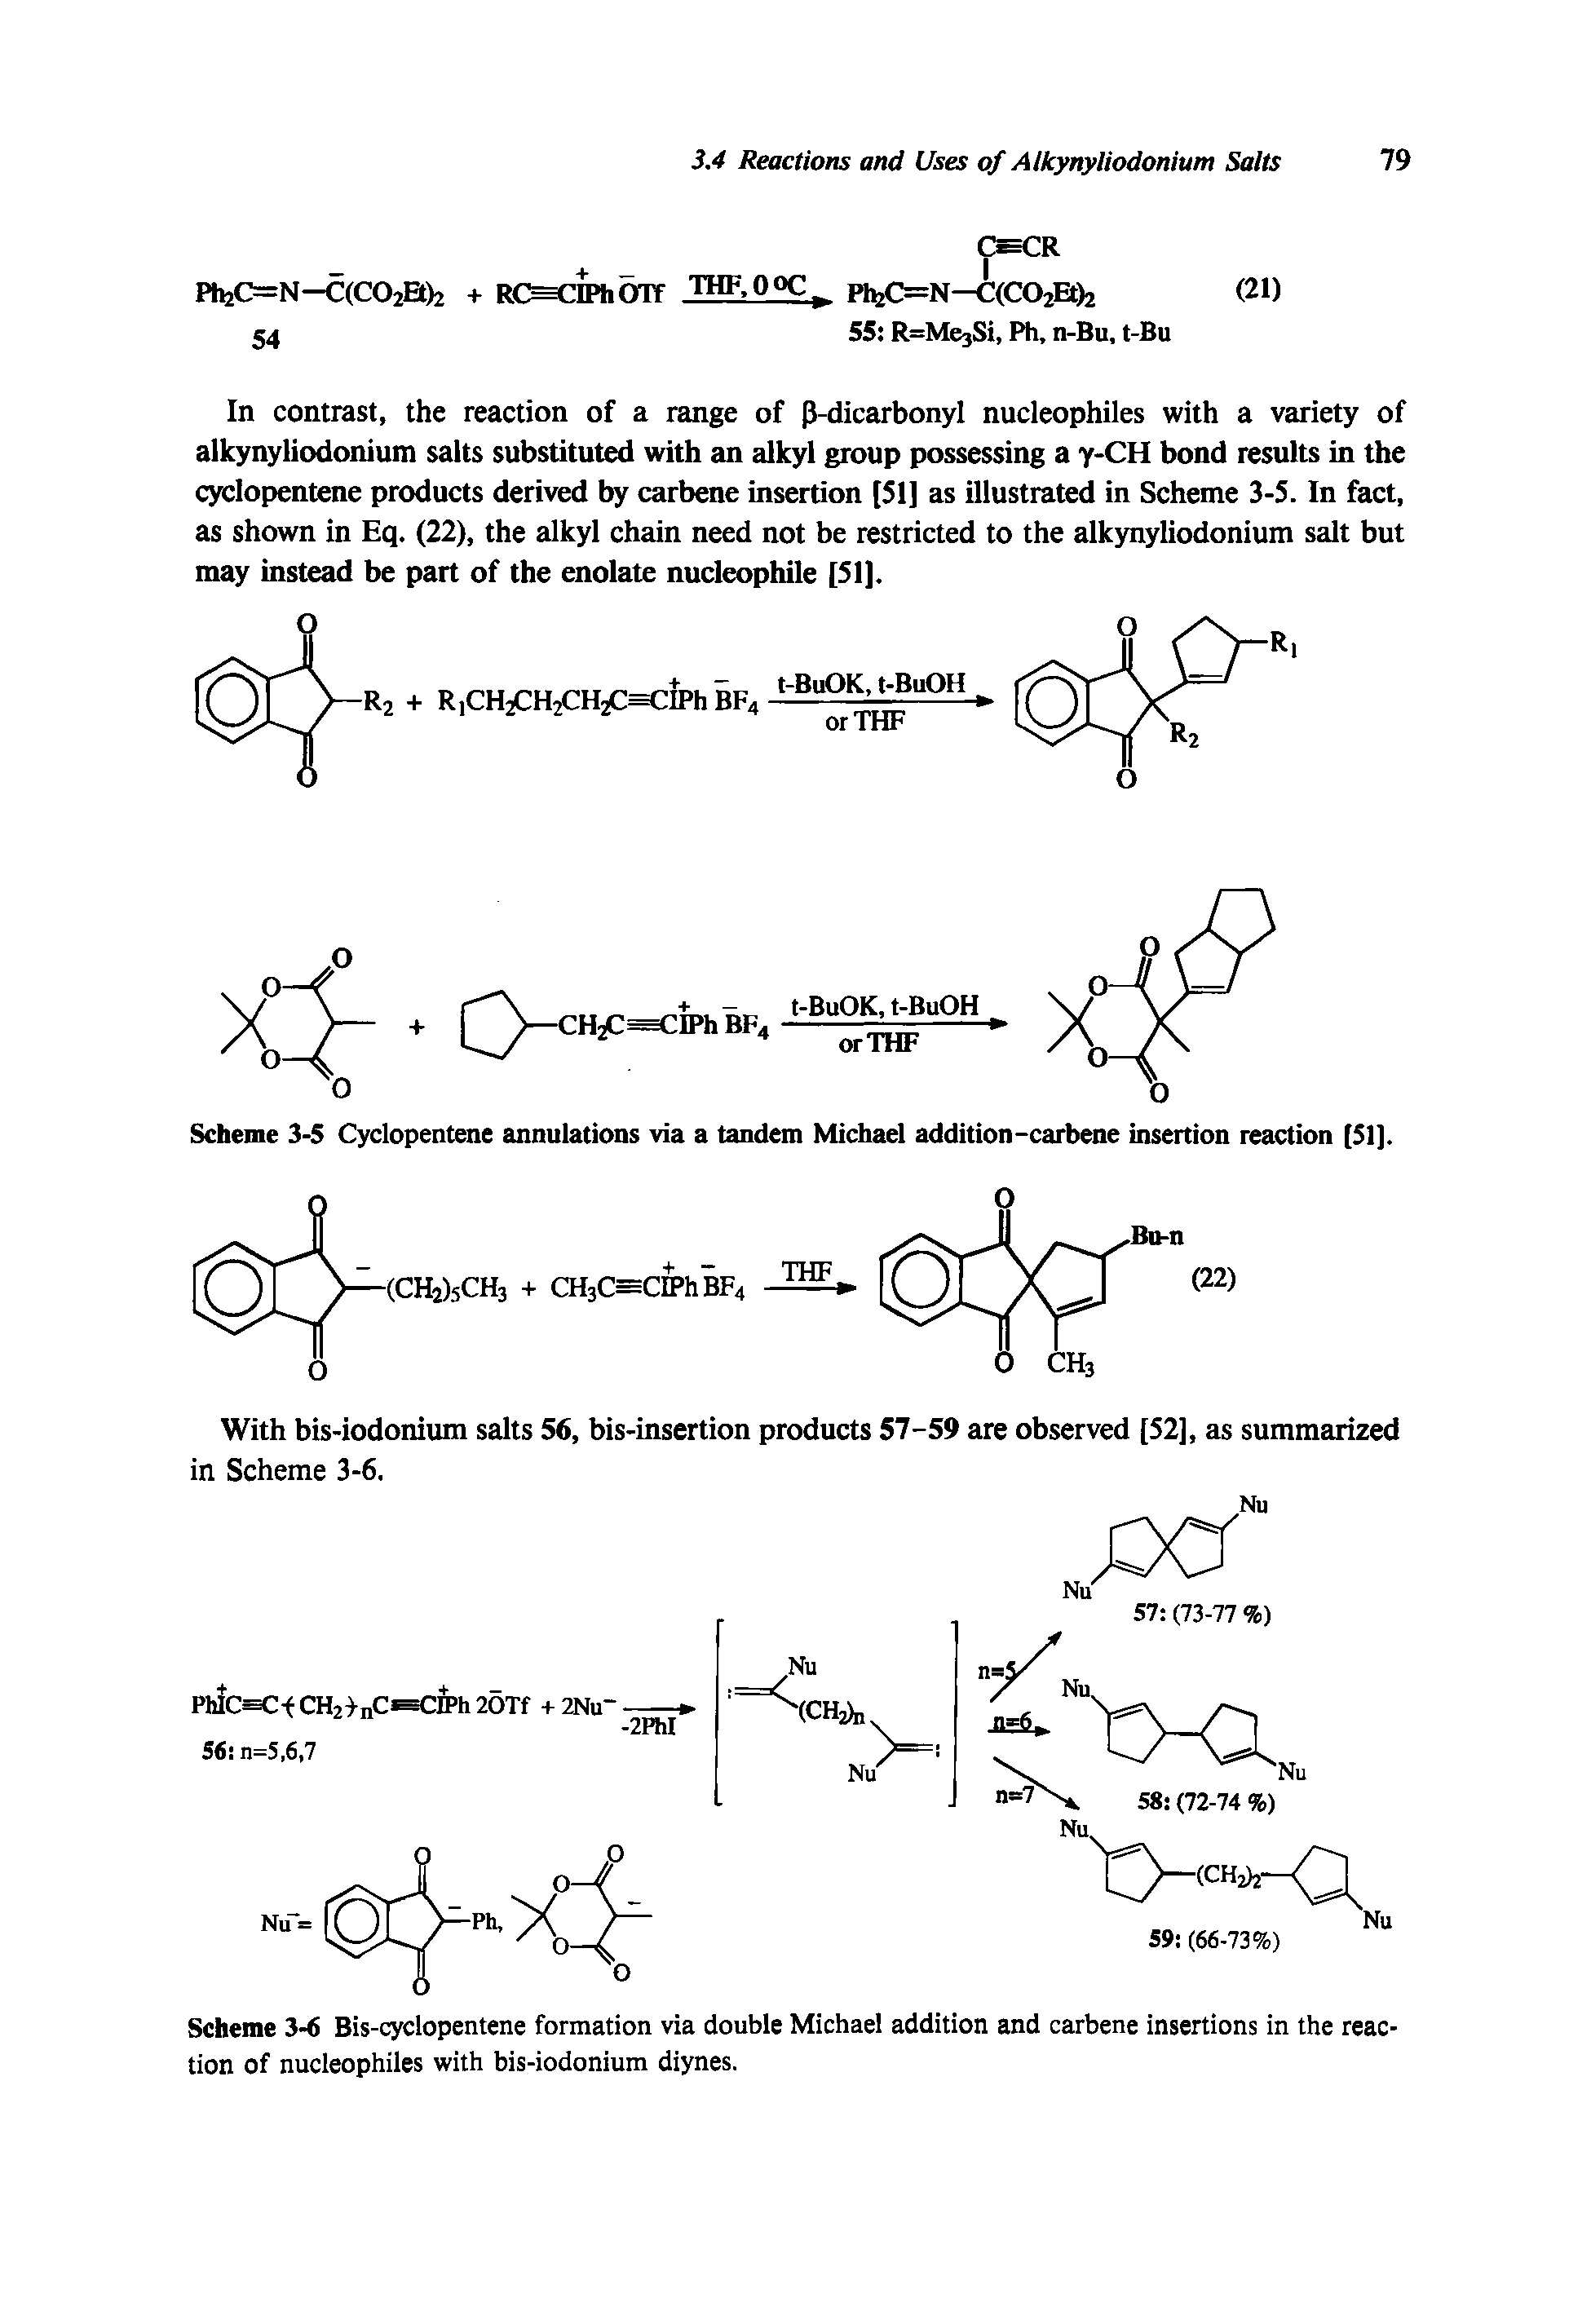 Scheme 3-6 Bis-cyclopentene formation via double Michael addition and carbene insertions in the reaction of nucleophiles with bis-iodonium diynes.